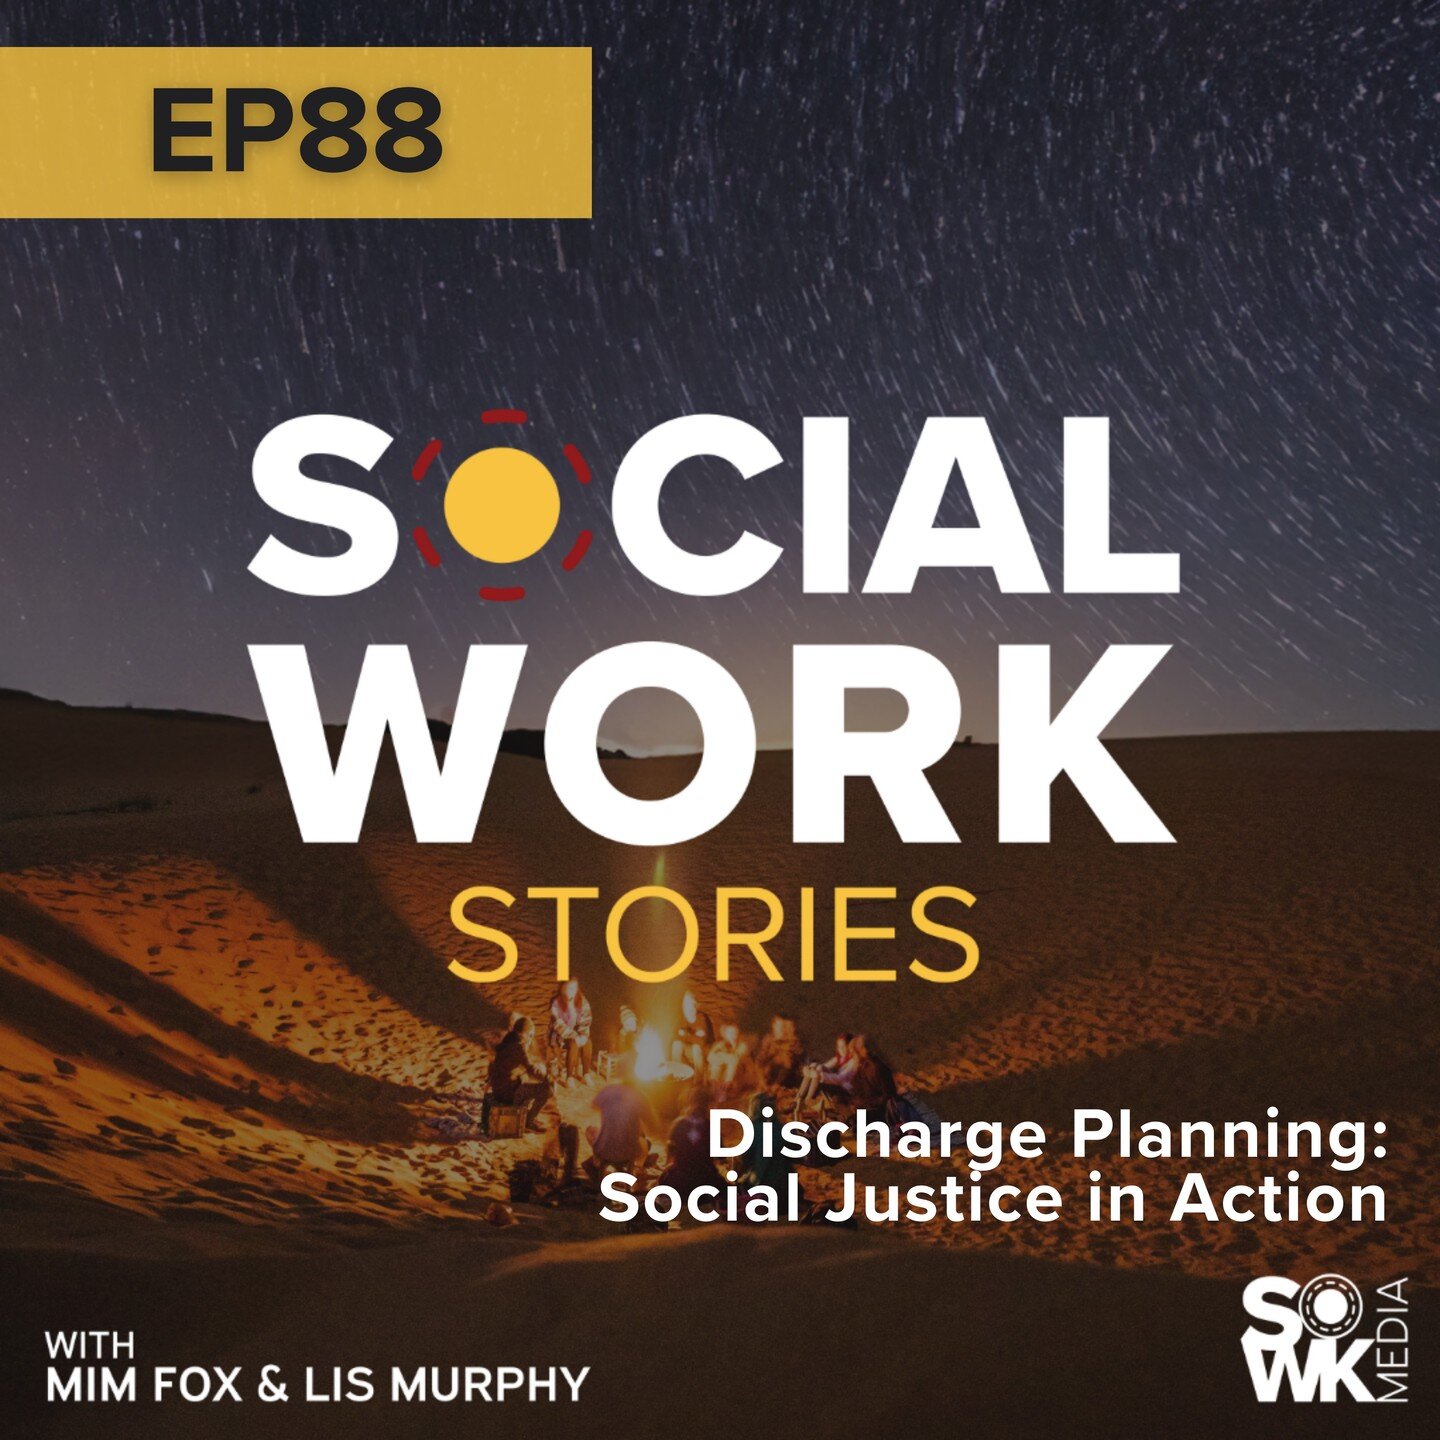 If you listen to this episode you'll never think of 'discharge planning' as simply admin again... it'll become an act of social justice each and every time!
.
🎙️𝗘𝗽. 𝟴𝟴 - 𝗗𝗶𝘀𝗰𝗵𝗮𝗿𝗴𝗲 𝗣𝗹𝗮𝗻𝗻𝗶𝗻𝗴: 𝗦𝗼𝗰𝗶𝗮𝗹 𝗝𝘂𝘀𝘁𝗶𝗰𝗲 𝗶𝗻 𝗔𝗰?